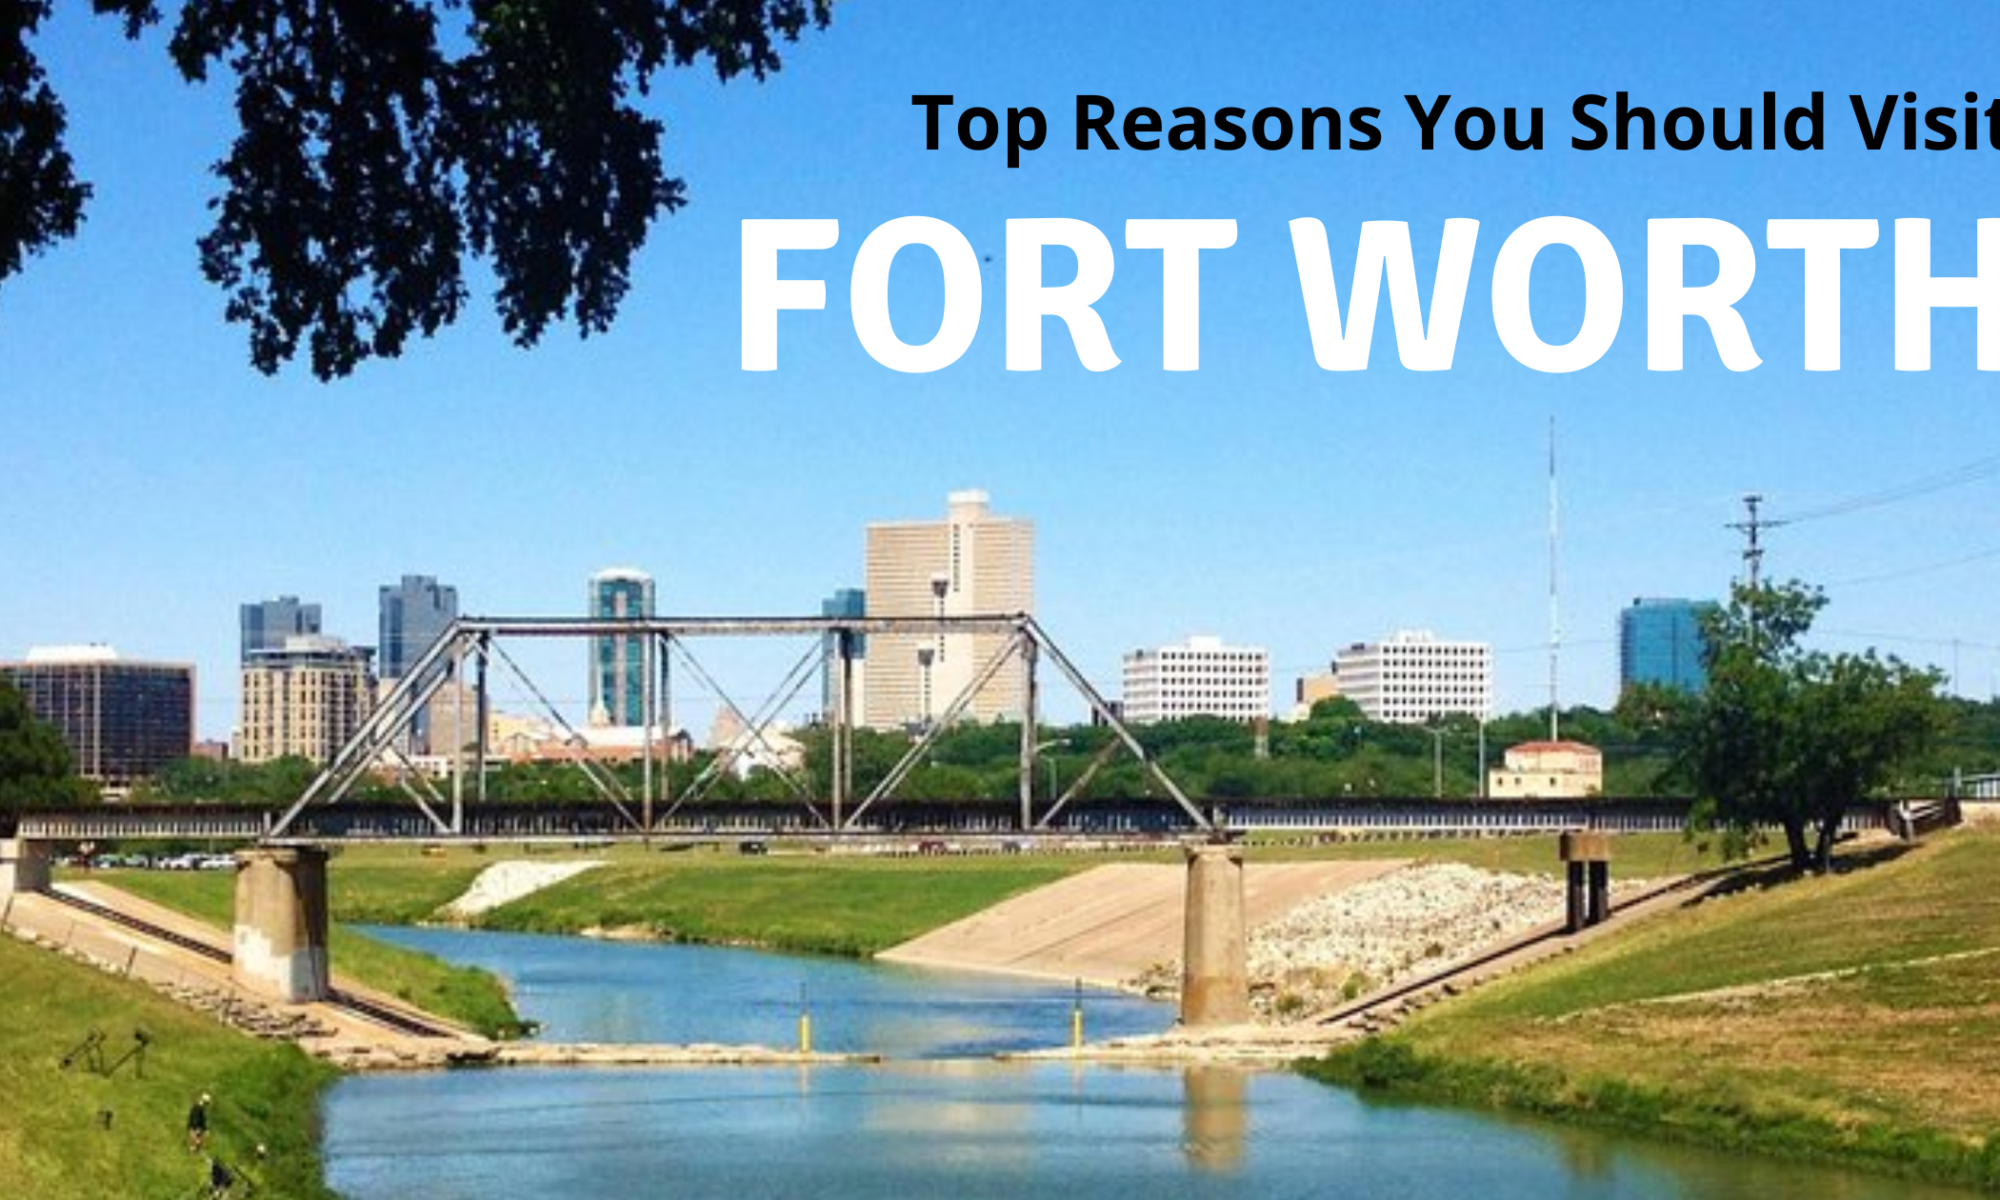 Fort Worth - Tourist Attractions, Things to do, Hotels and Restaurants